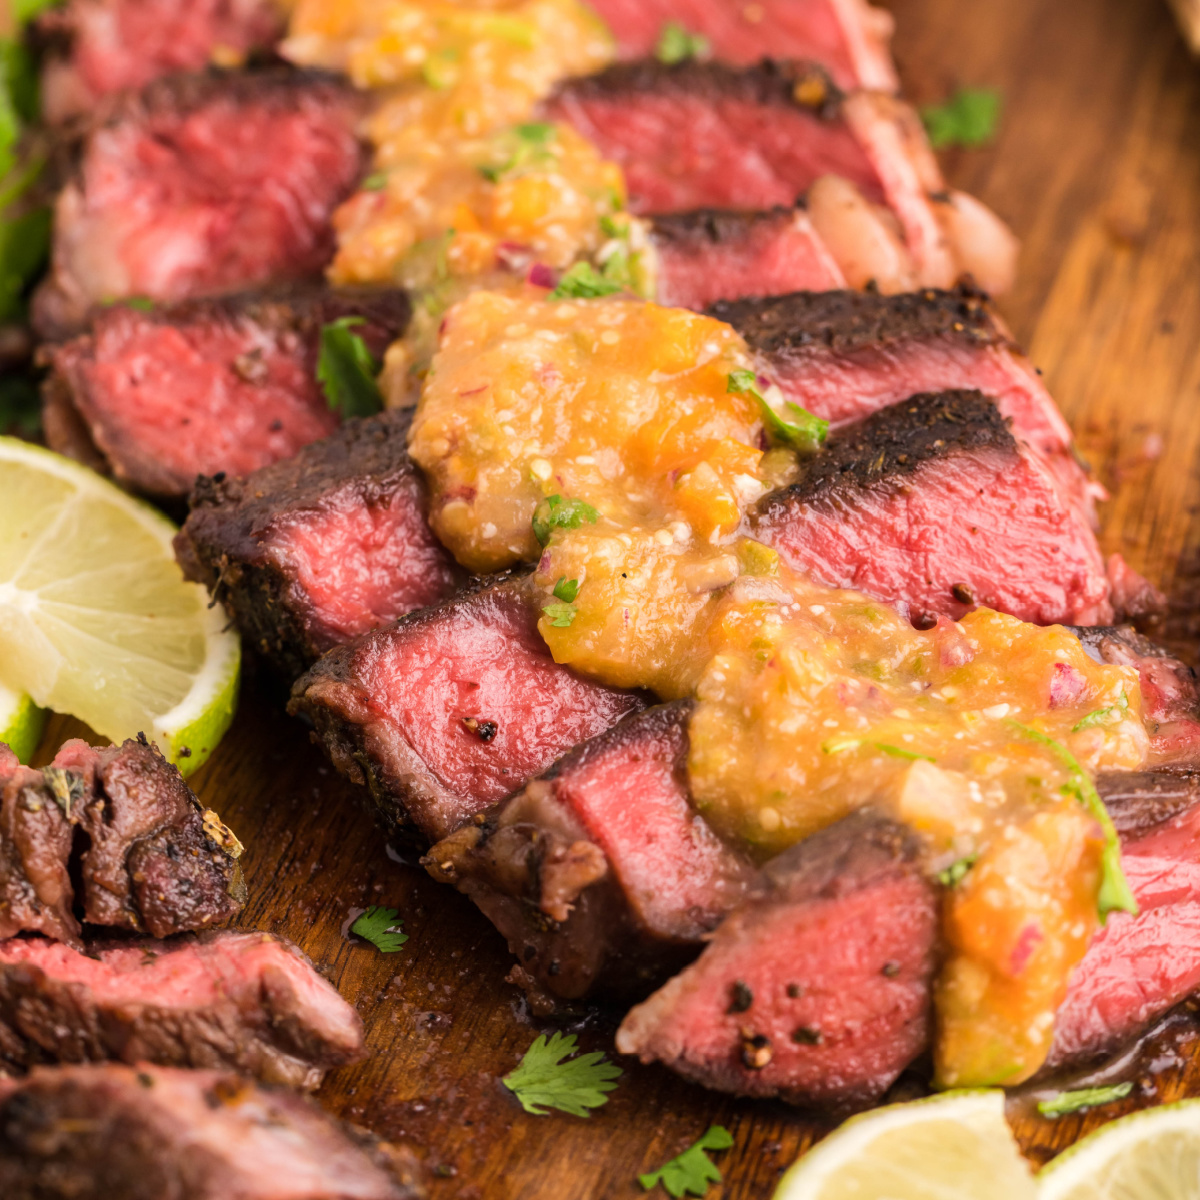 Slices of grilled ribeye steak drizzled with homemade salsa on a wooden board.